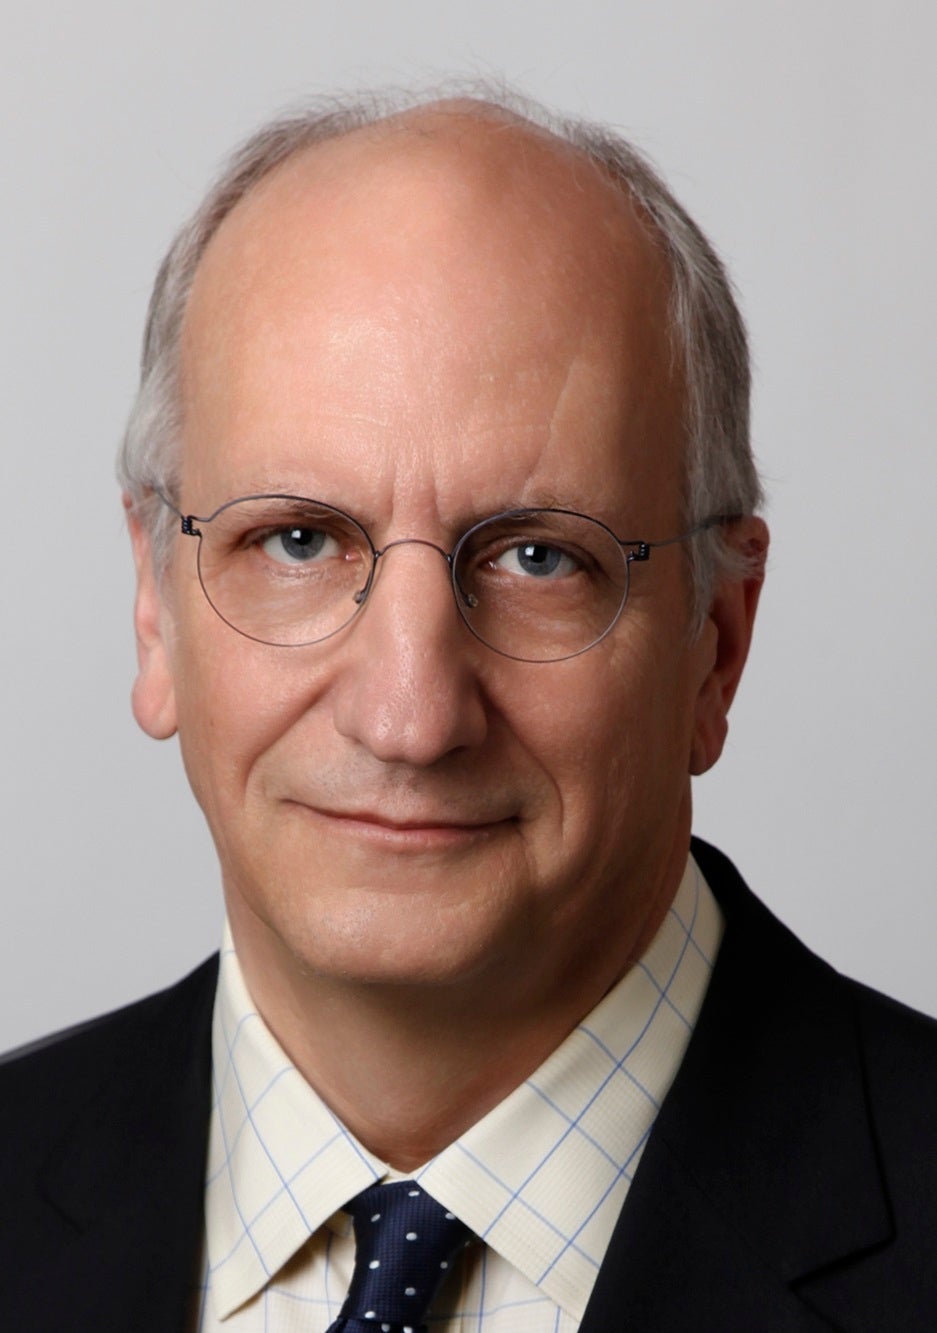 Headshot of Will Miller, president of the Wallace Foundation